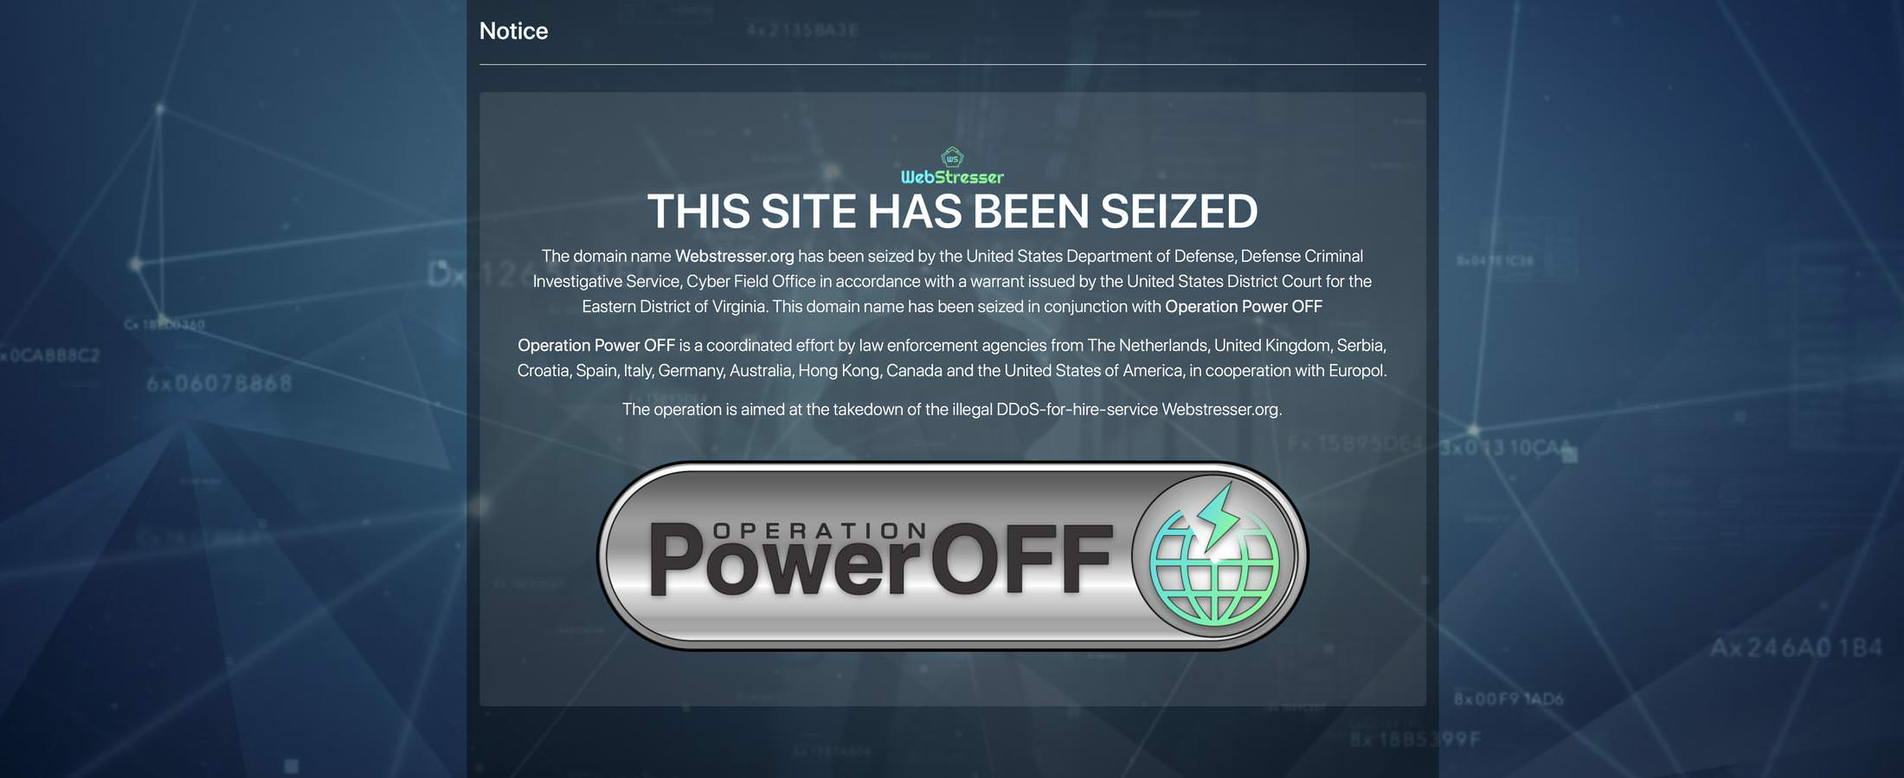 WebStresser.org seized by the United States Department of Defense.